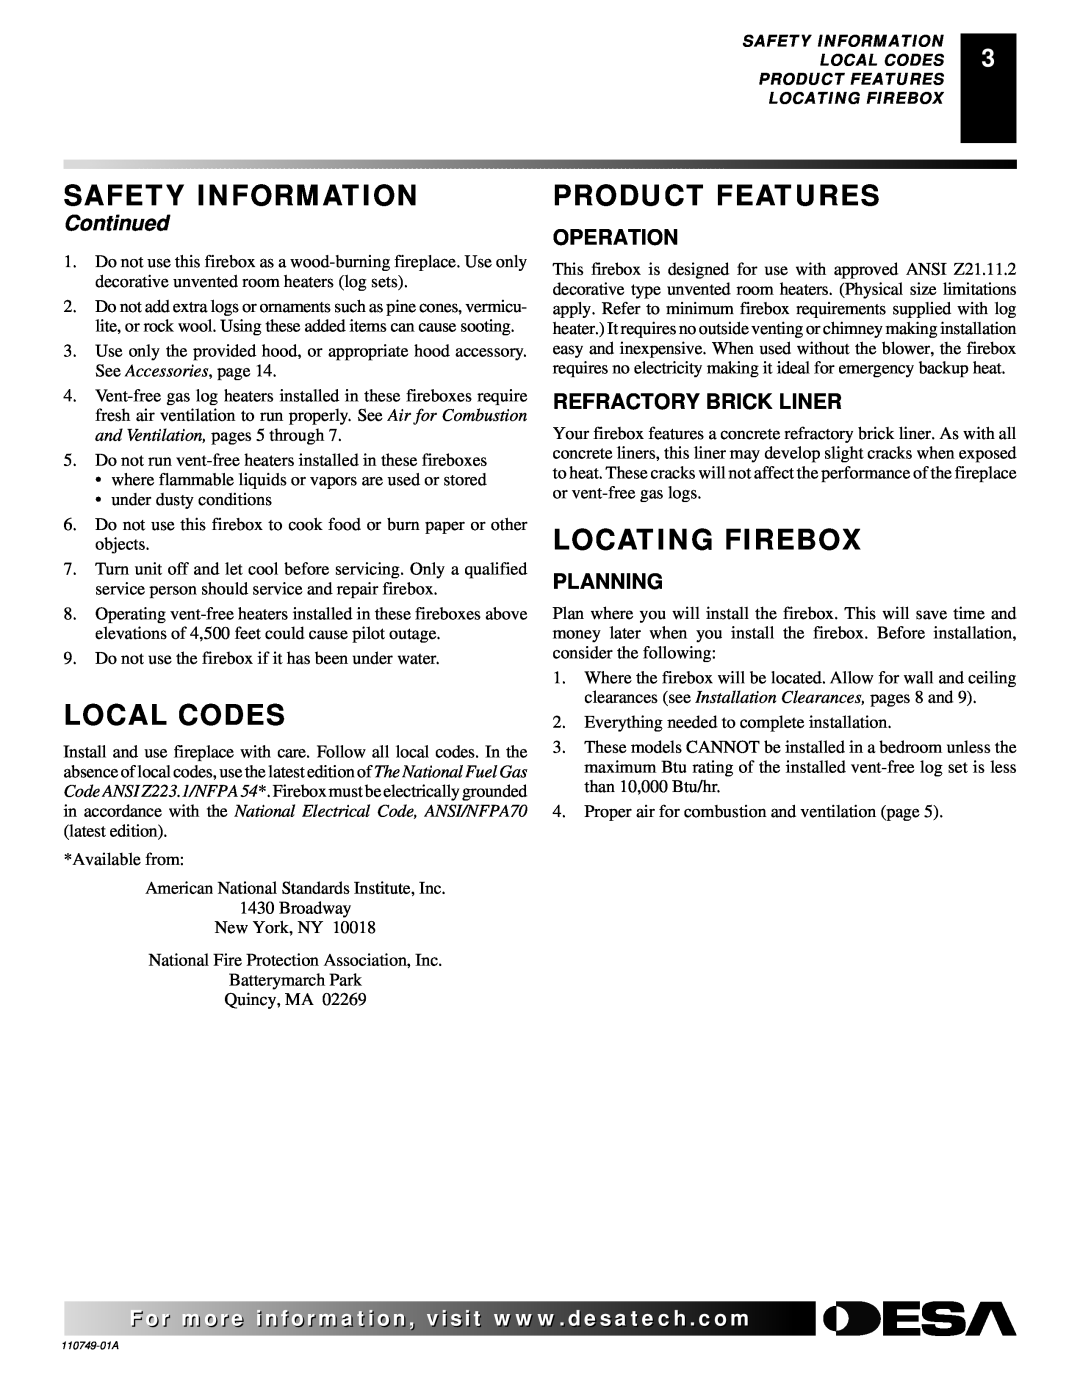 Desa VFB50NC, V50SH installation manual Local Codes, Product Features, Locating Firebox, Continued, Safety Information 